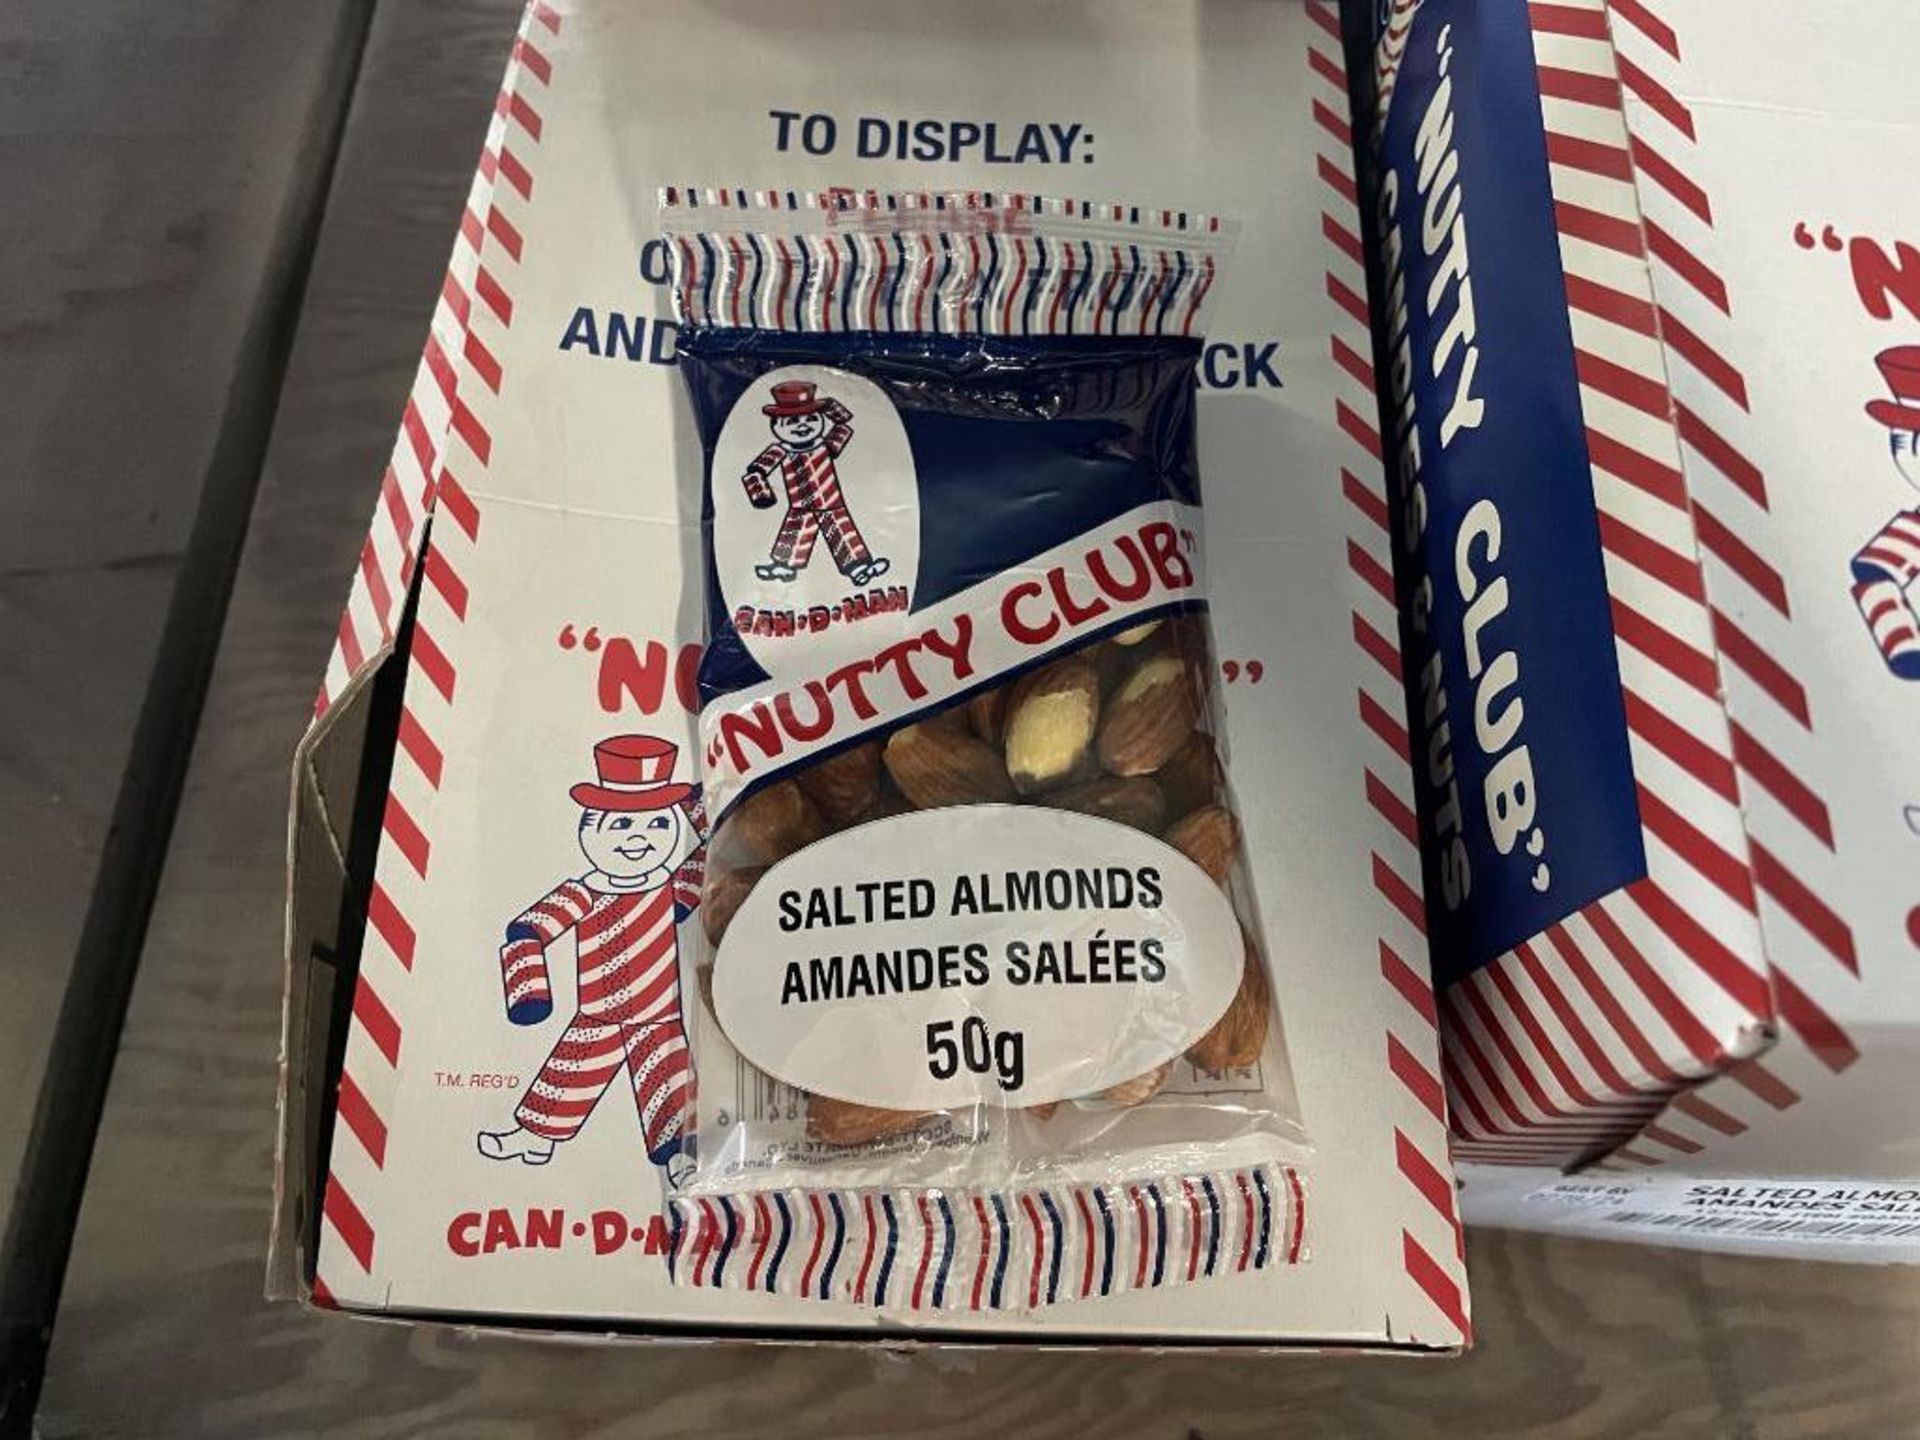 (22) BOXES OF NUTTY CLUB SALTED ALMONDS, (17) 12/100B PER BOX & (5) 12/50G PER BOX - Image 2 of 5